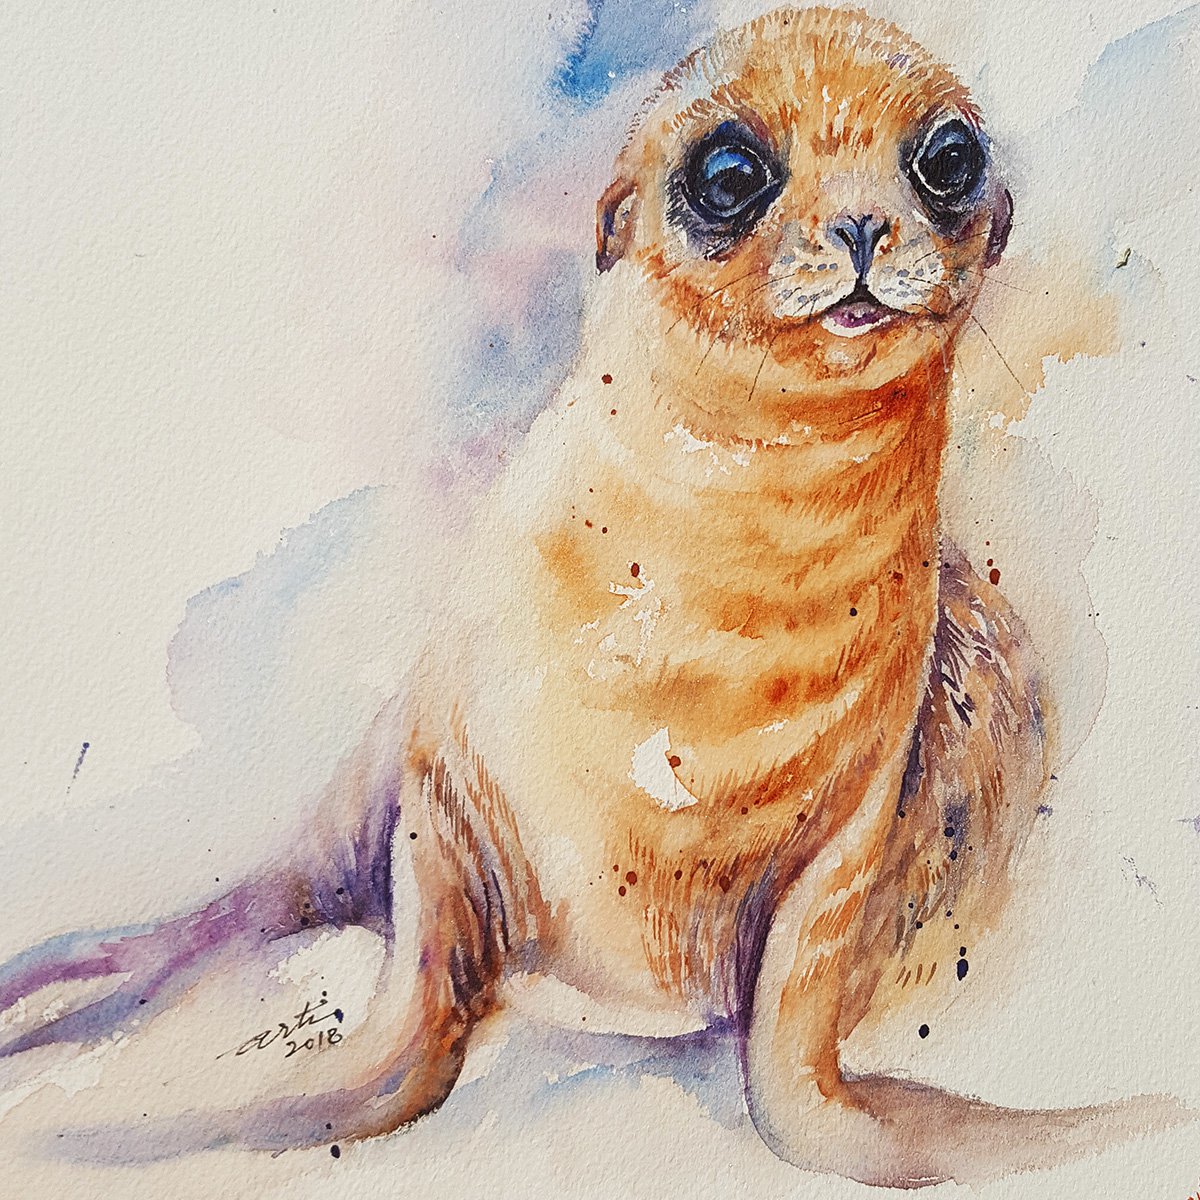 Selby the Sea Lion Cub by Arti Chauhan